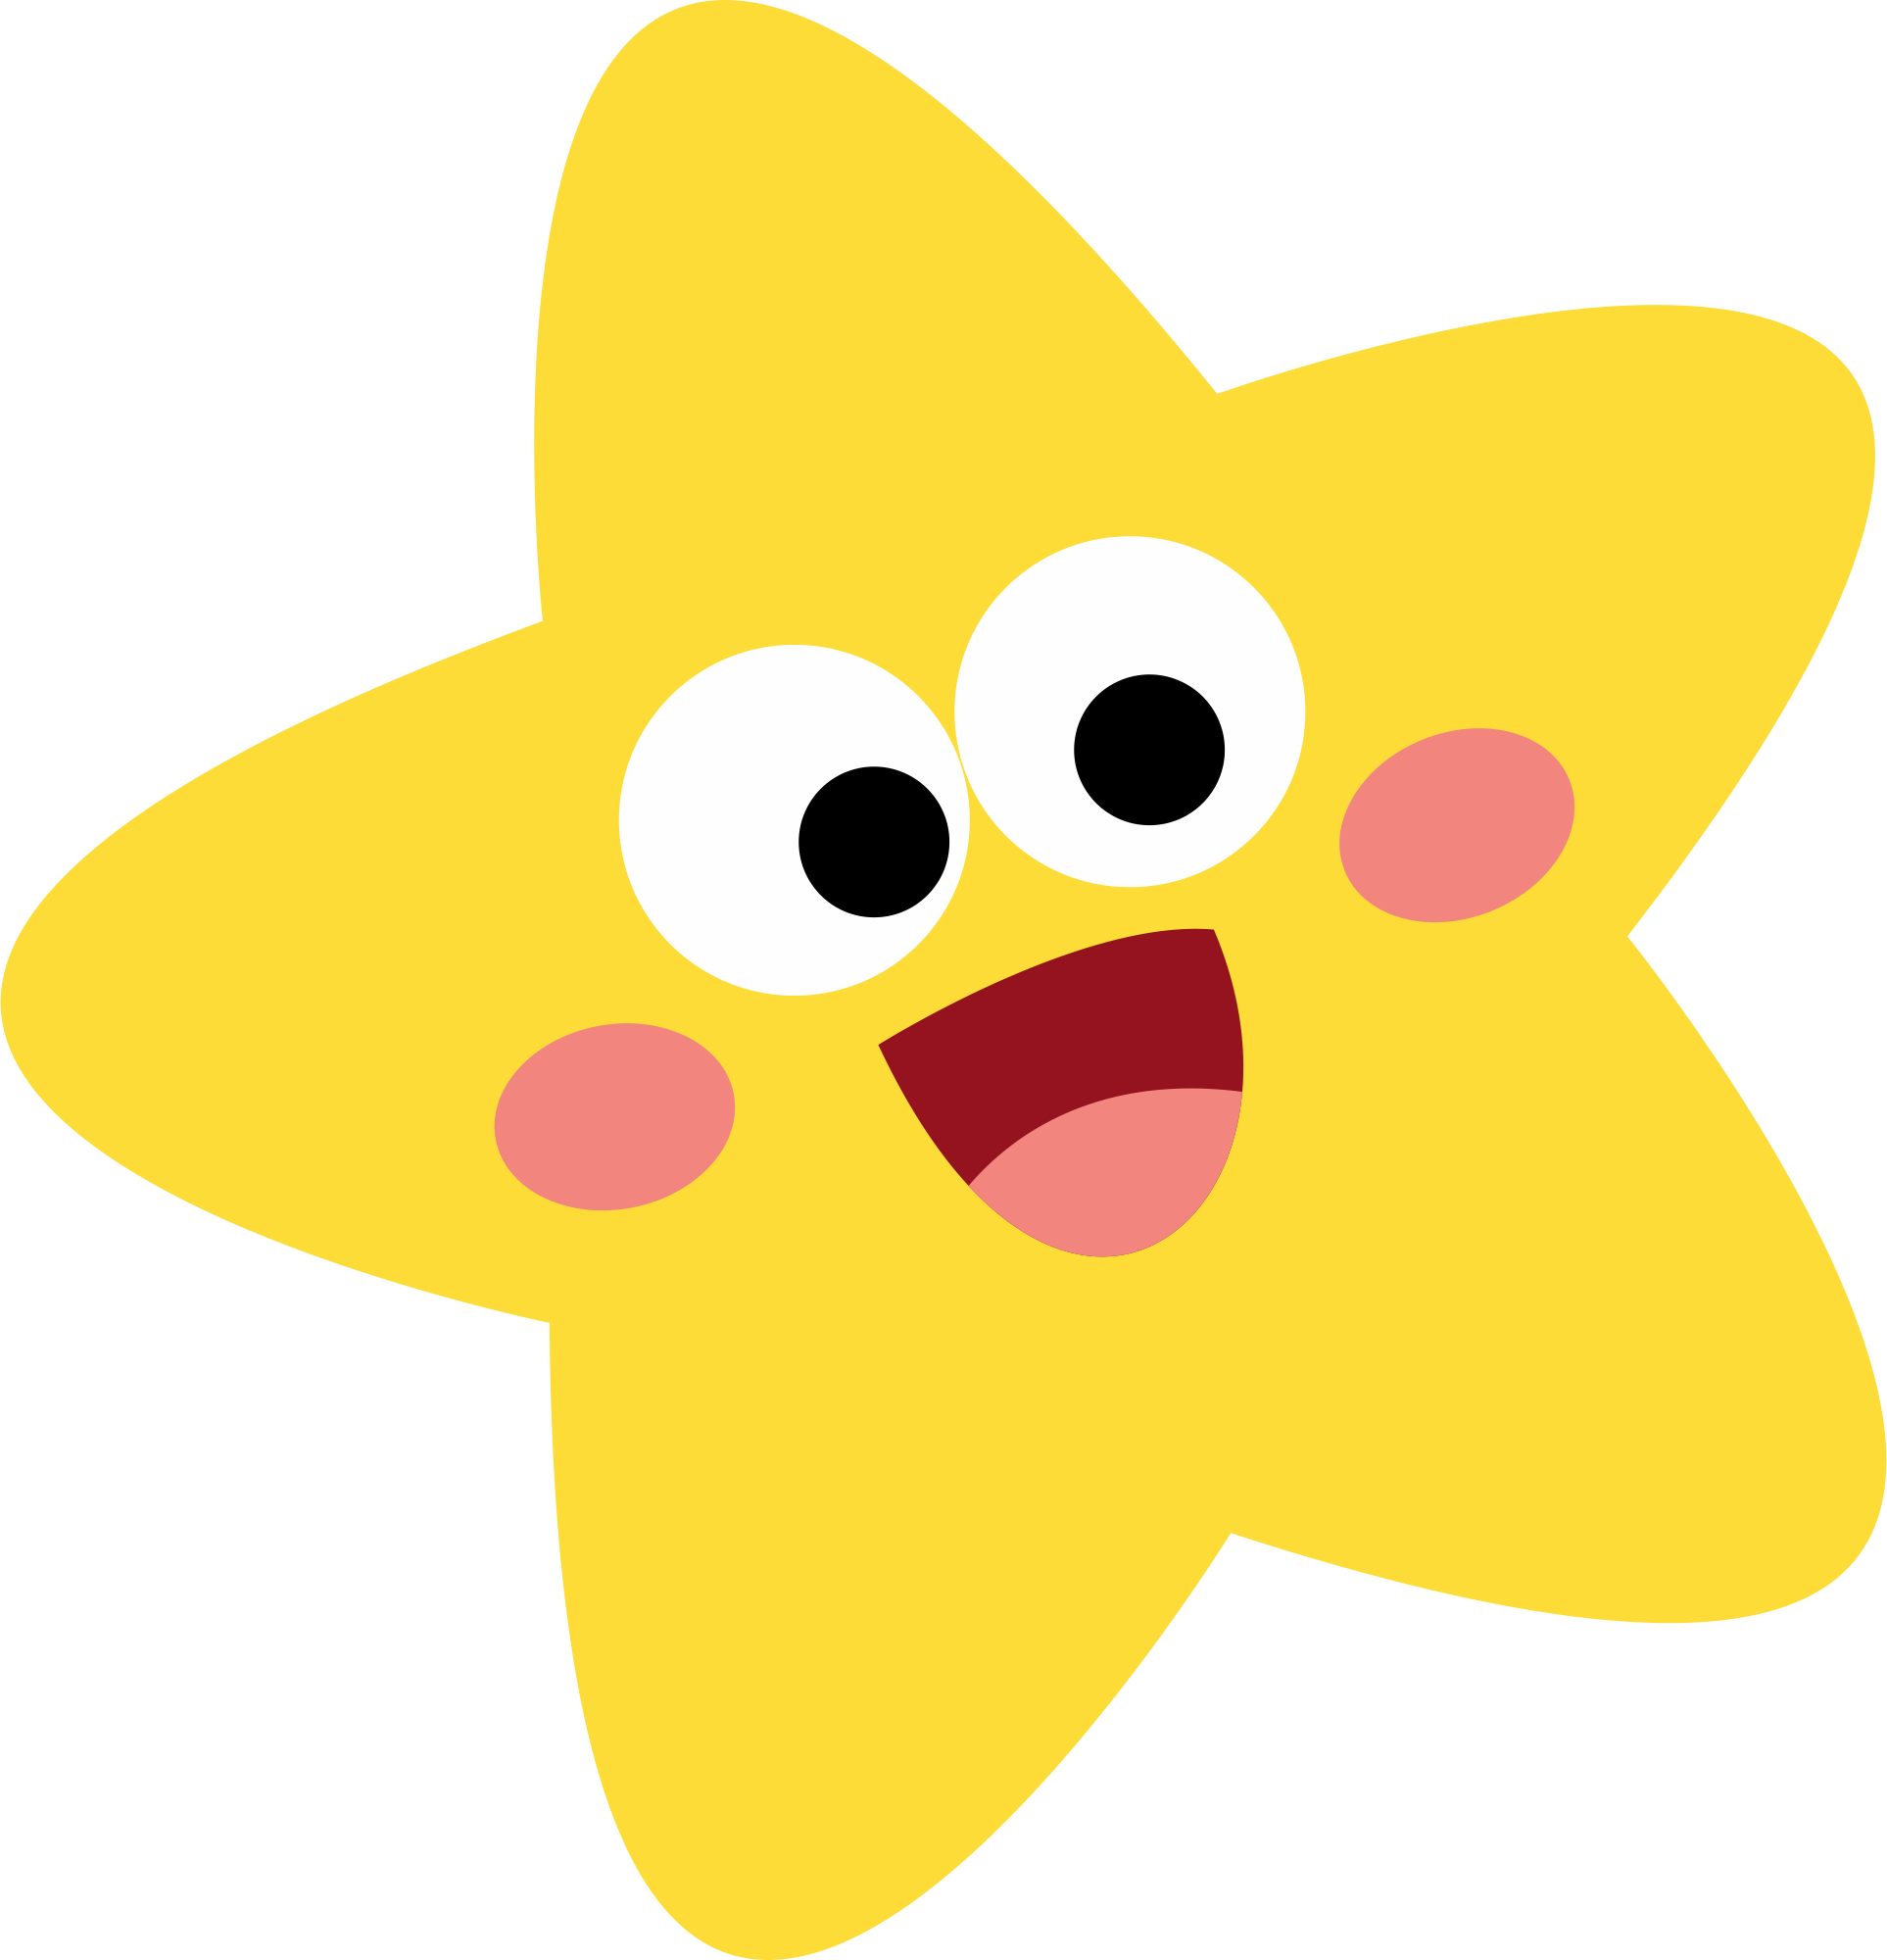 A Yellow Star With Eyes And Mouth